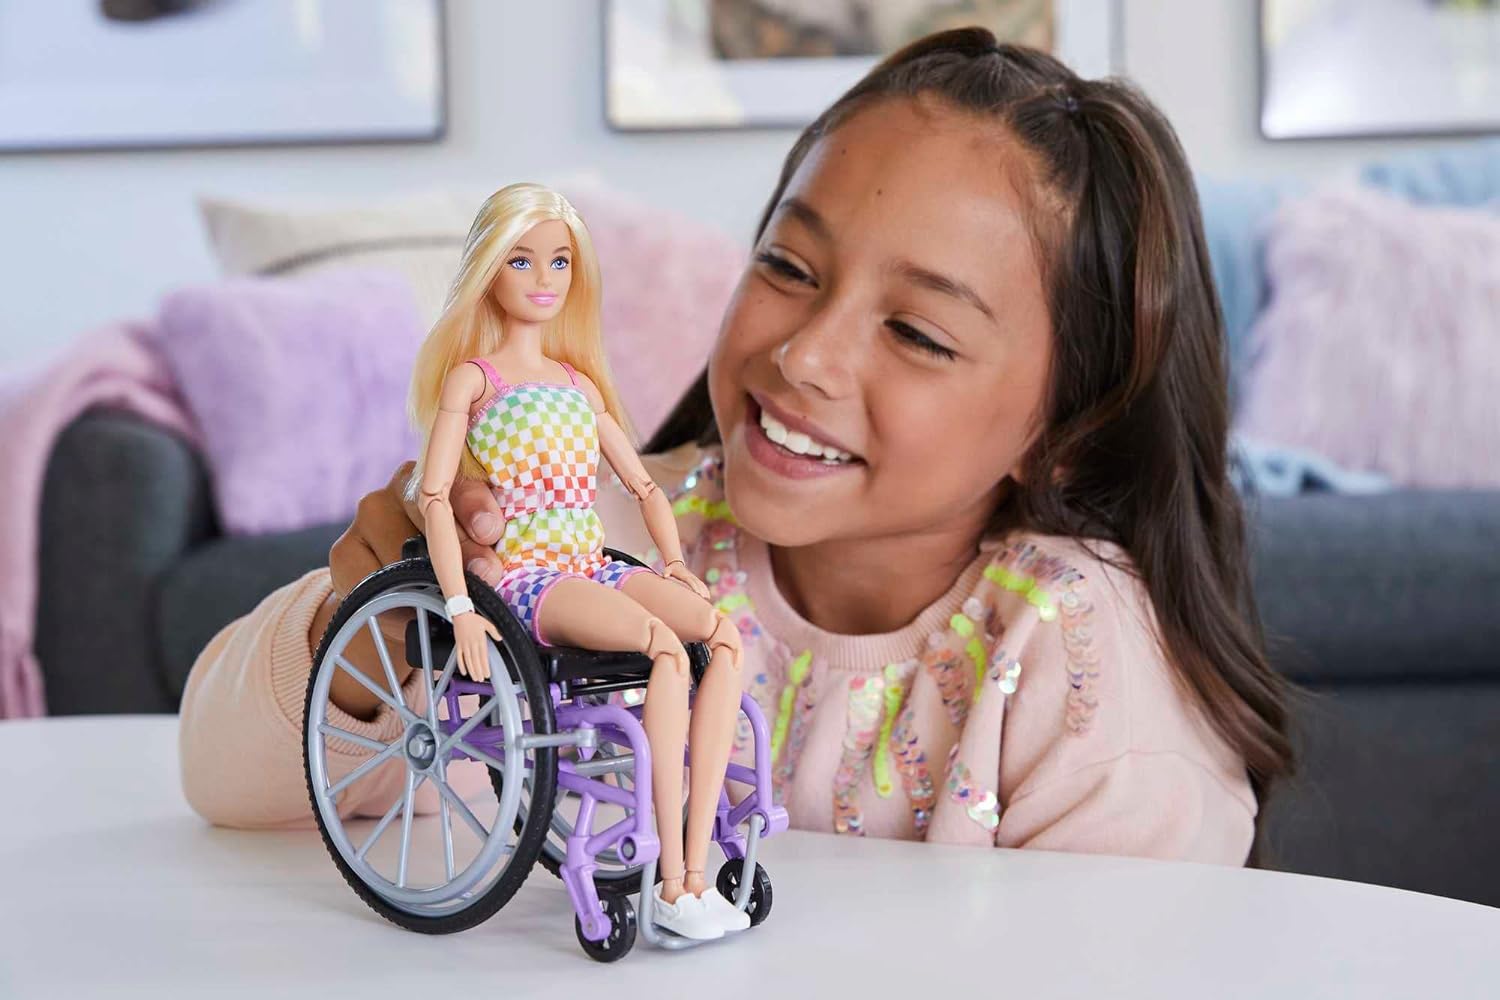 Barbie Doll with Wheelchair and Ramp, Kids Toys, Blonde, Barbie Fashionistas, Rainbow Romper, Clothes and Accessories